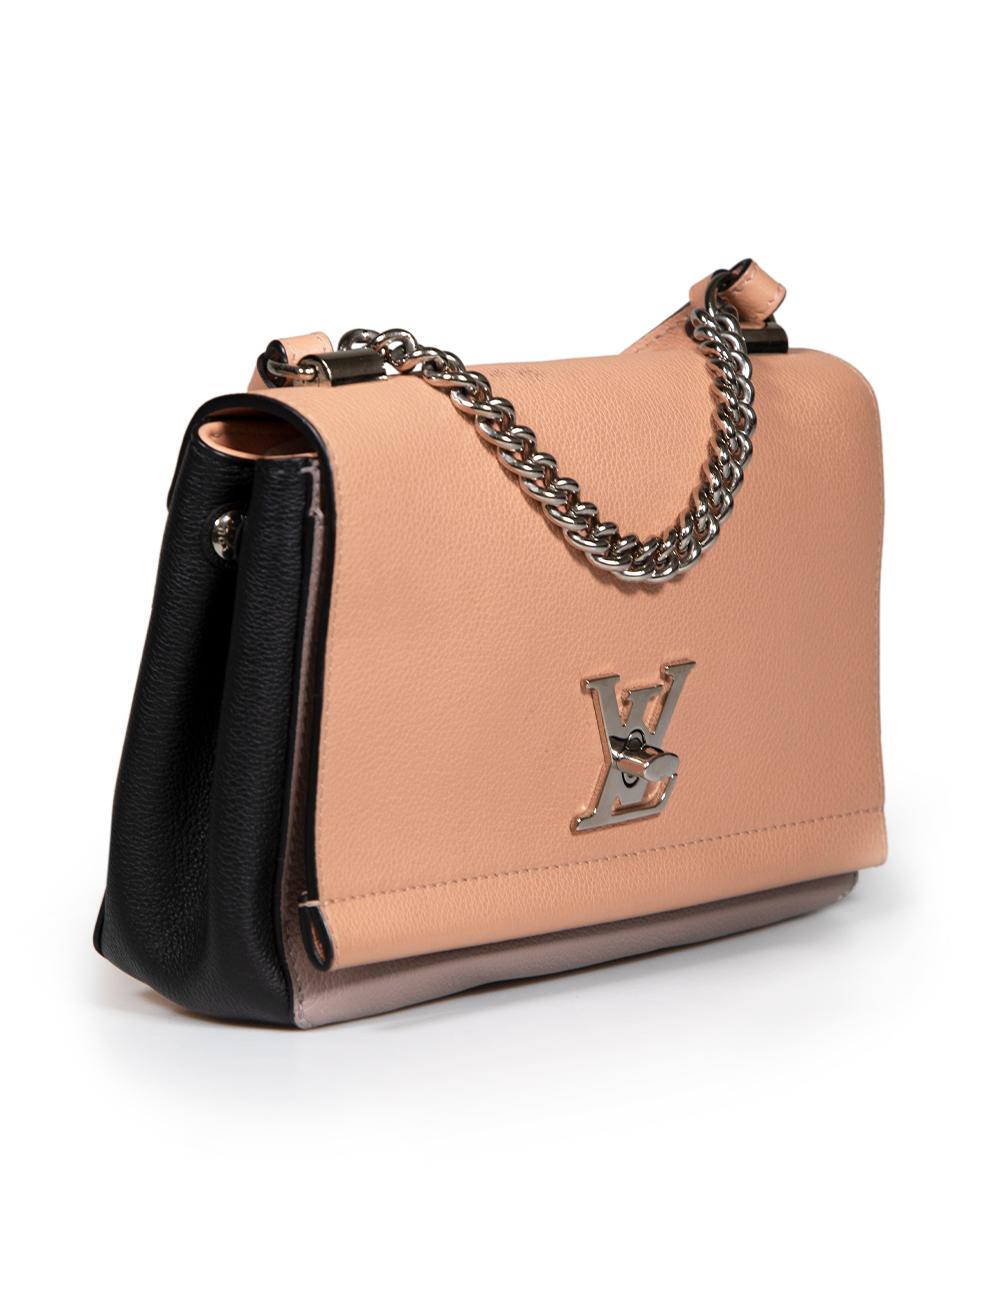 CONDITION is Very good. Minimal wear to bag is evident. Minimal wear to the metal hardware with scratches to both sides of the fastening. The lining also has discoloured marks on this used Louis Vuitton designer resale item. This item comes with